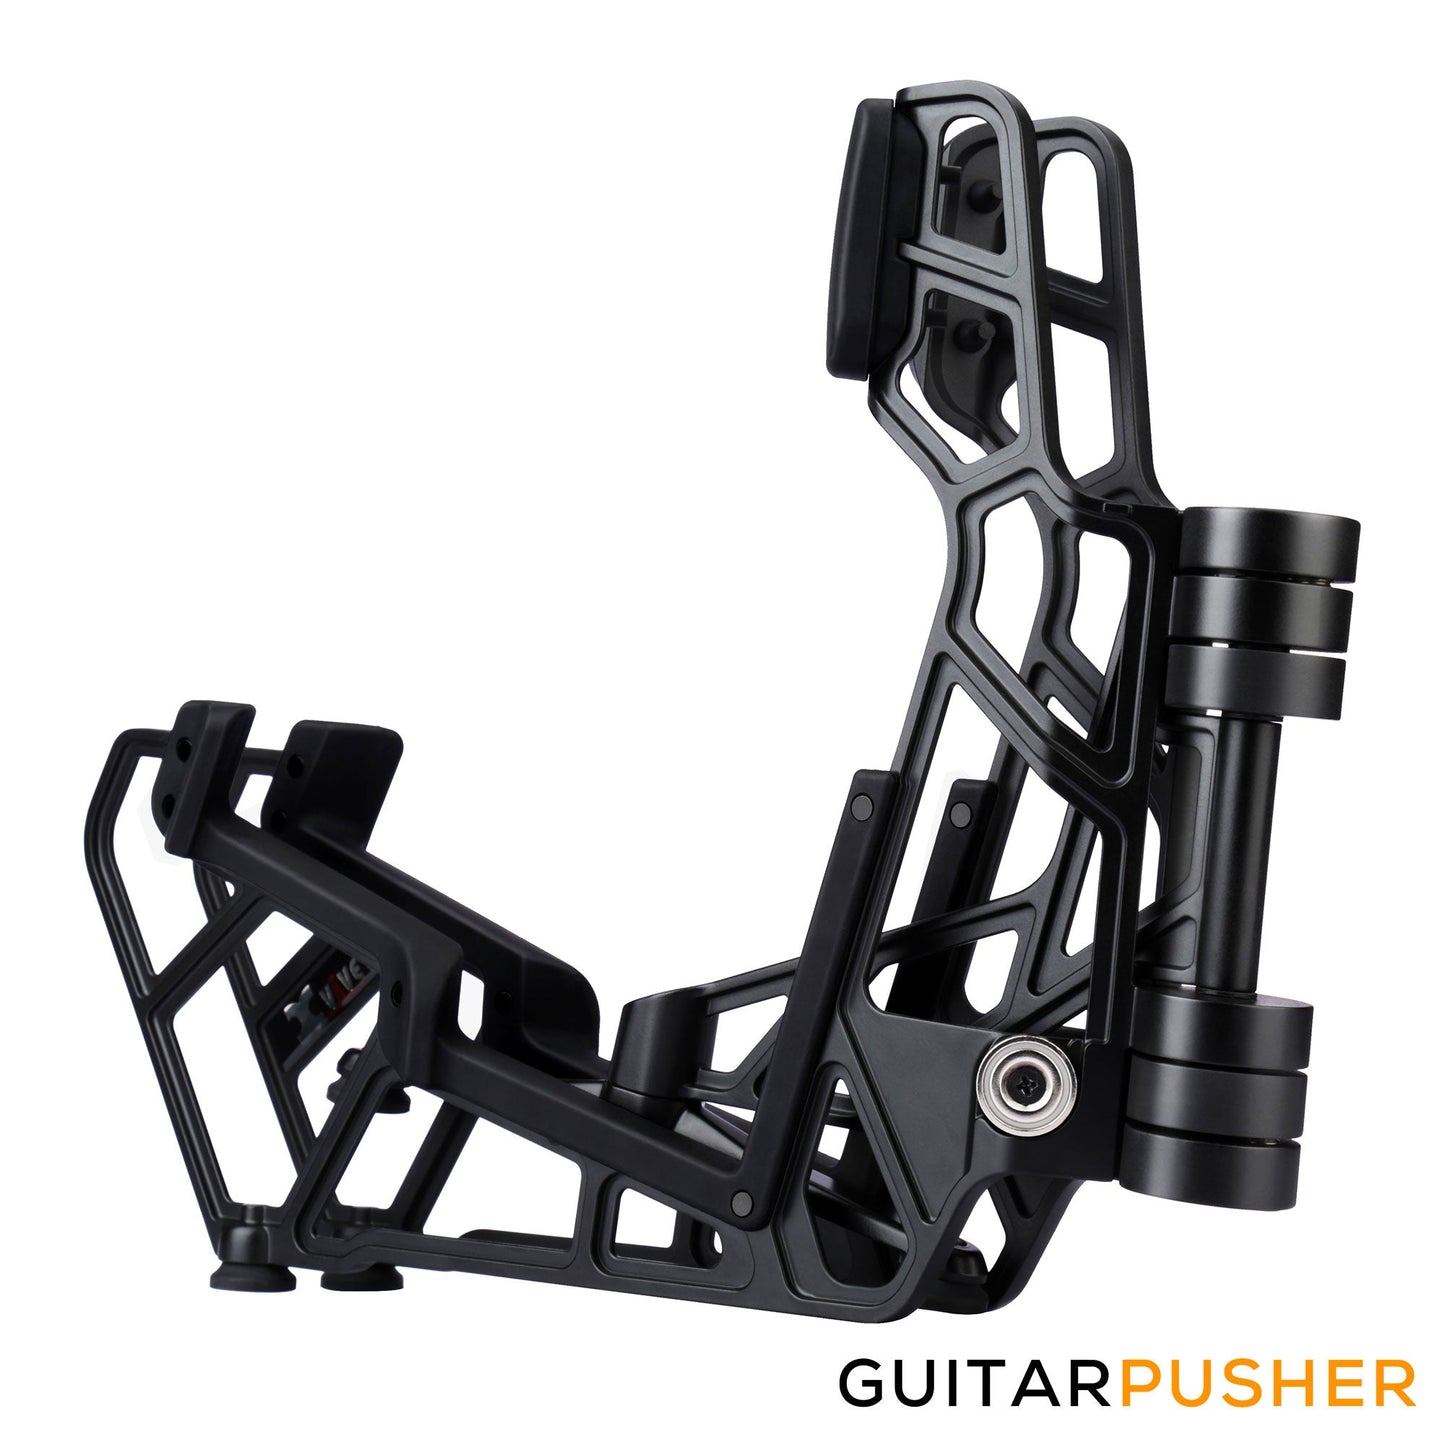 Xvive Audio G1 Foldable Guitar Stand